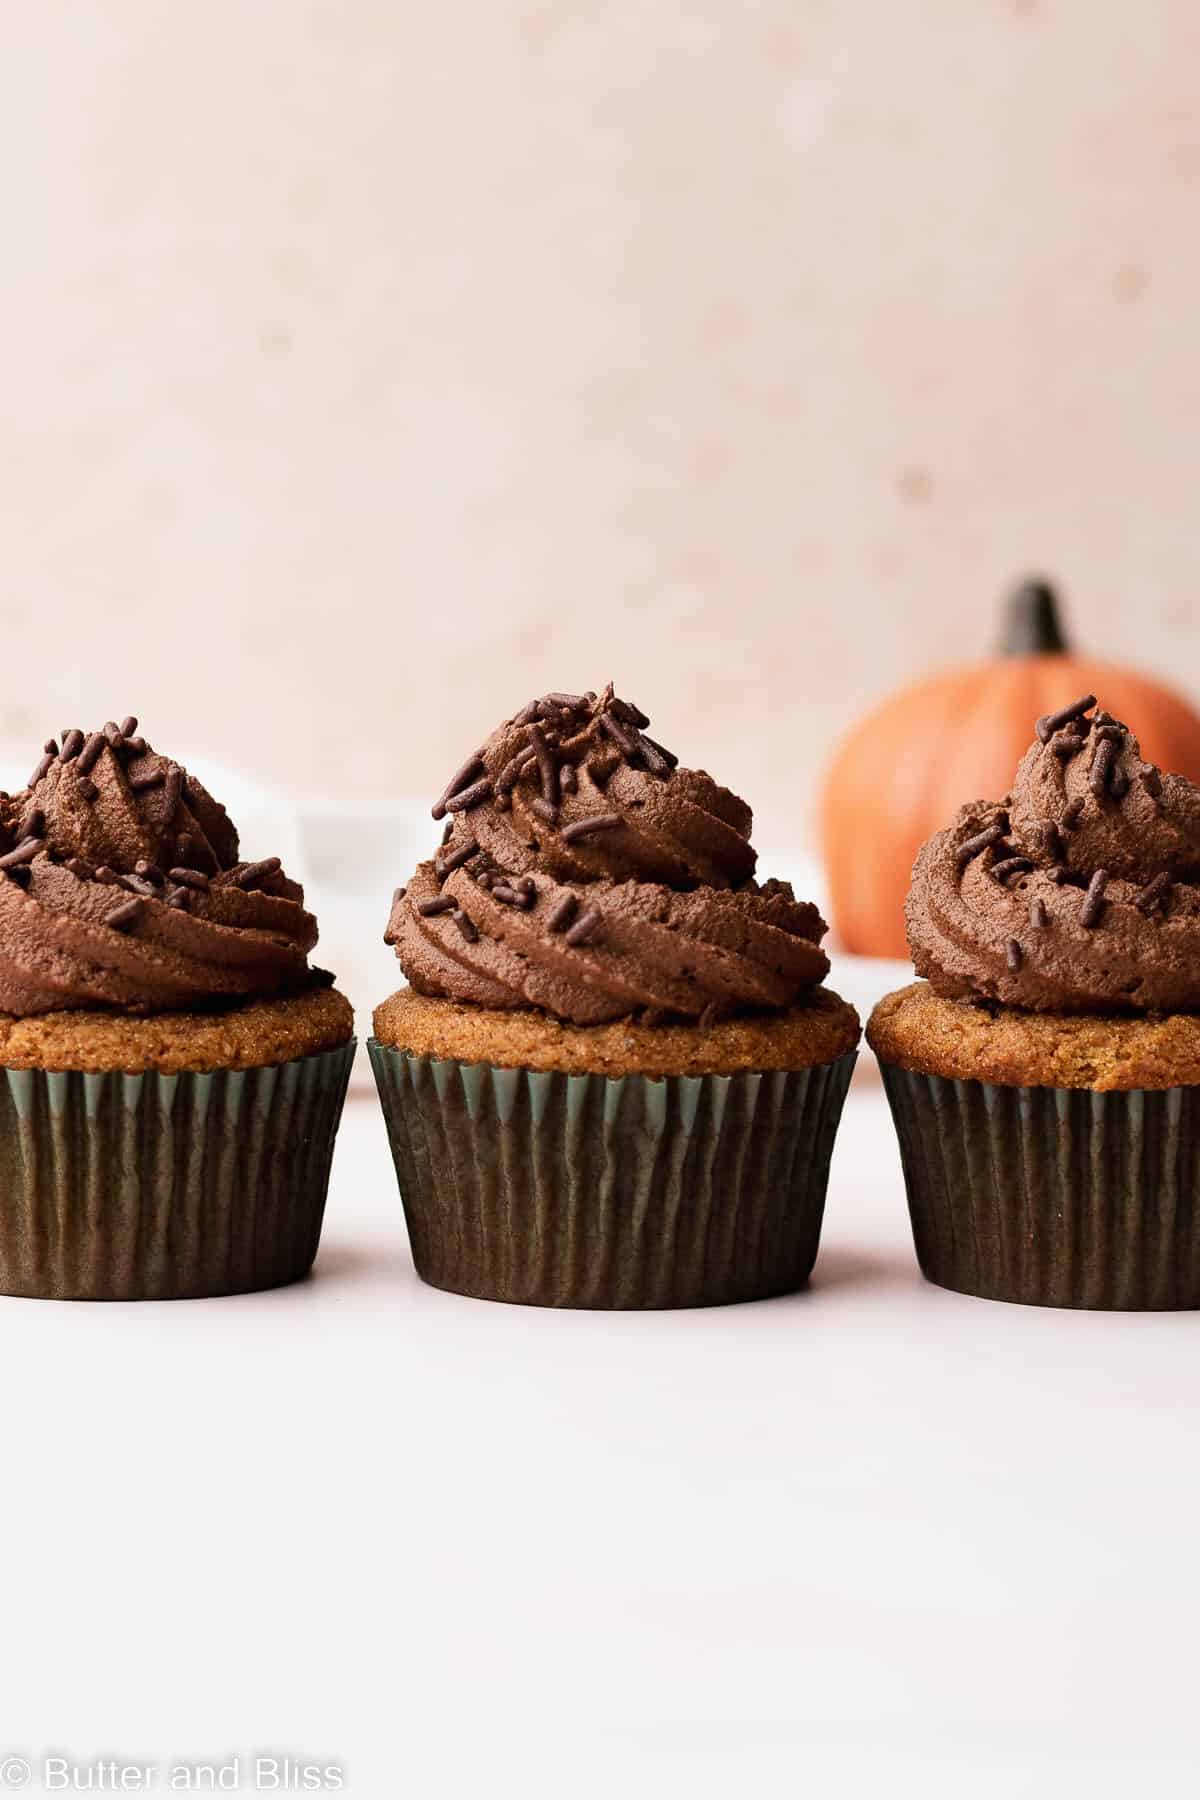 Three pumpkin gluten free cupcakes with chocolate frosting lined up in a row on a table.